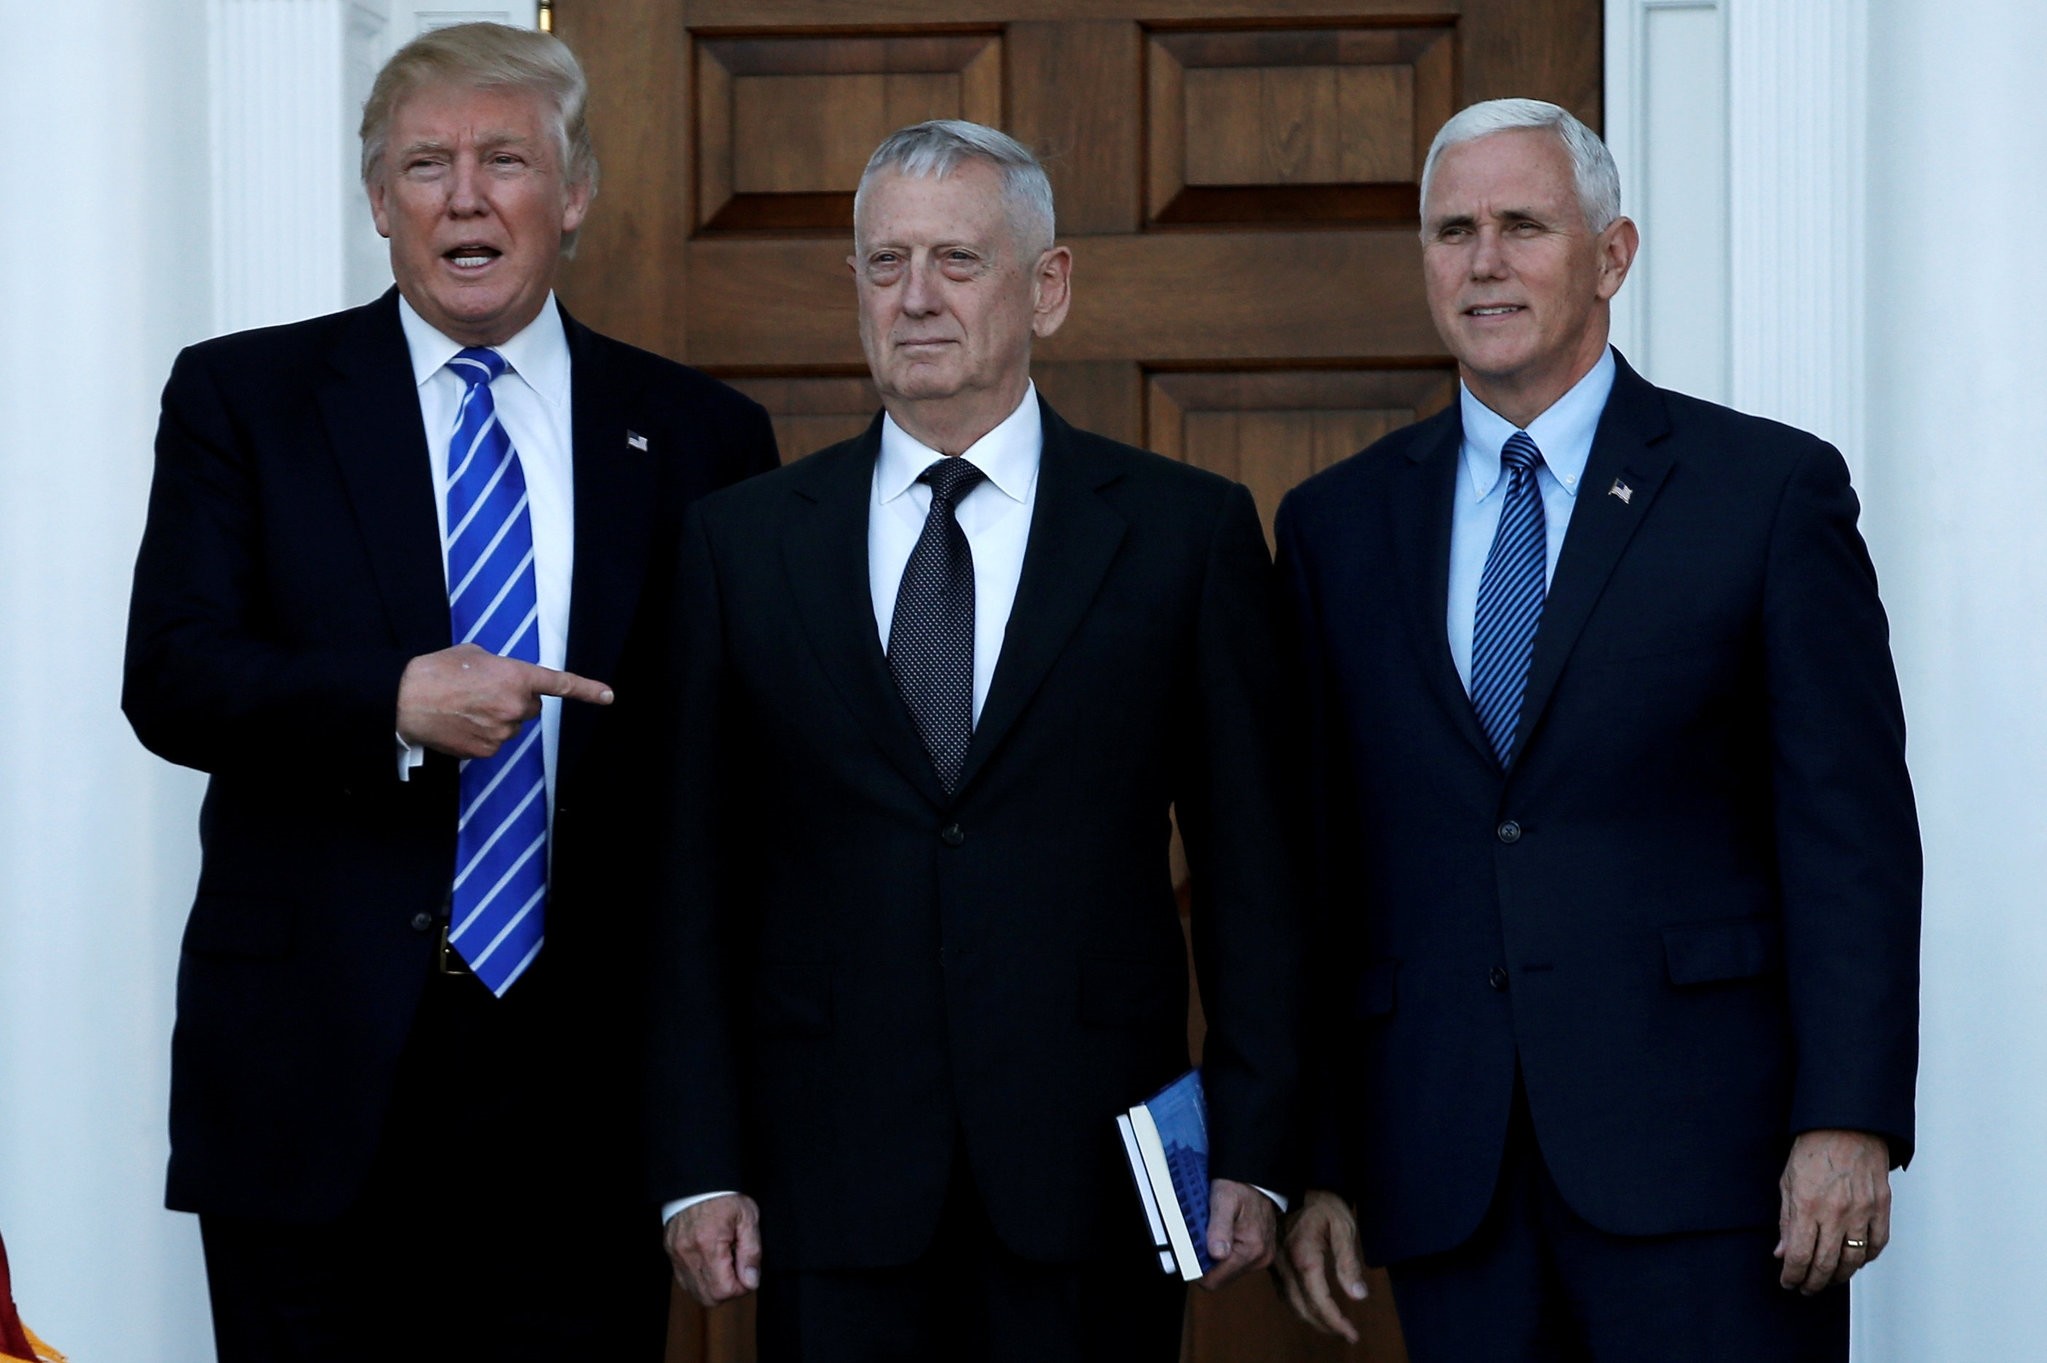 Trump (L) and Vice President-elect Mike Pence (R) greet retired Marine General James Mattis in Bedminster, New Jersey, U.S., November 19, 2016. (REUTERS Photo)